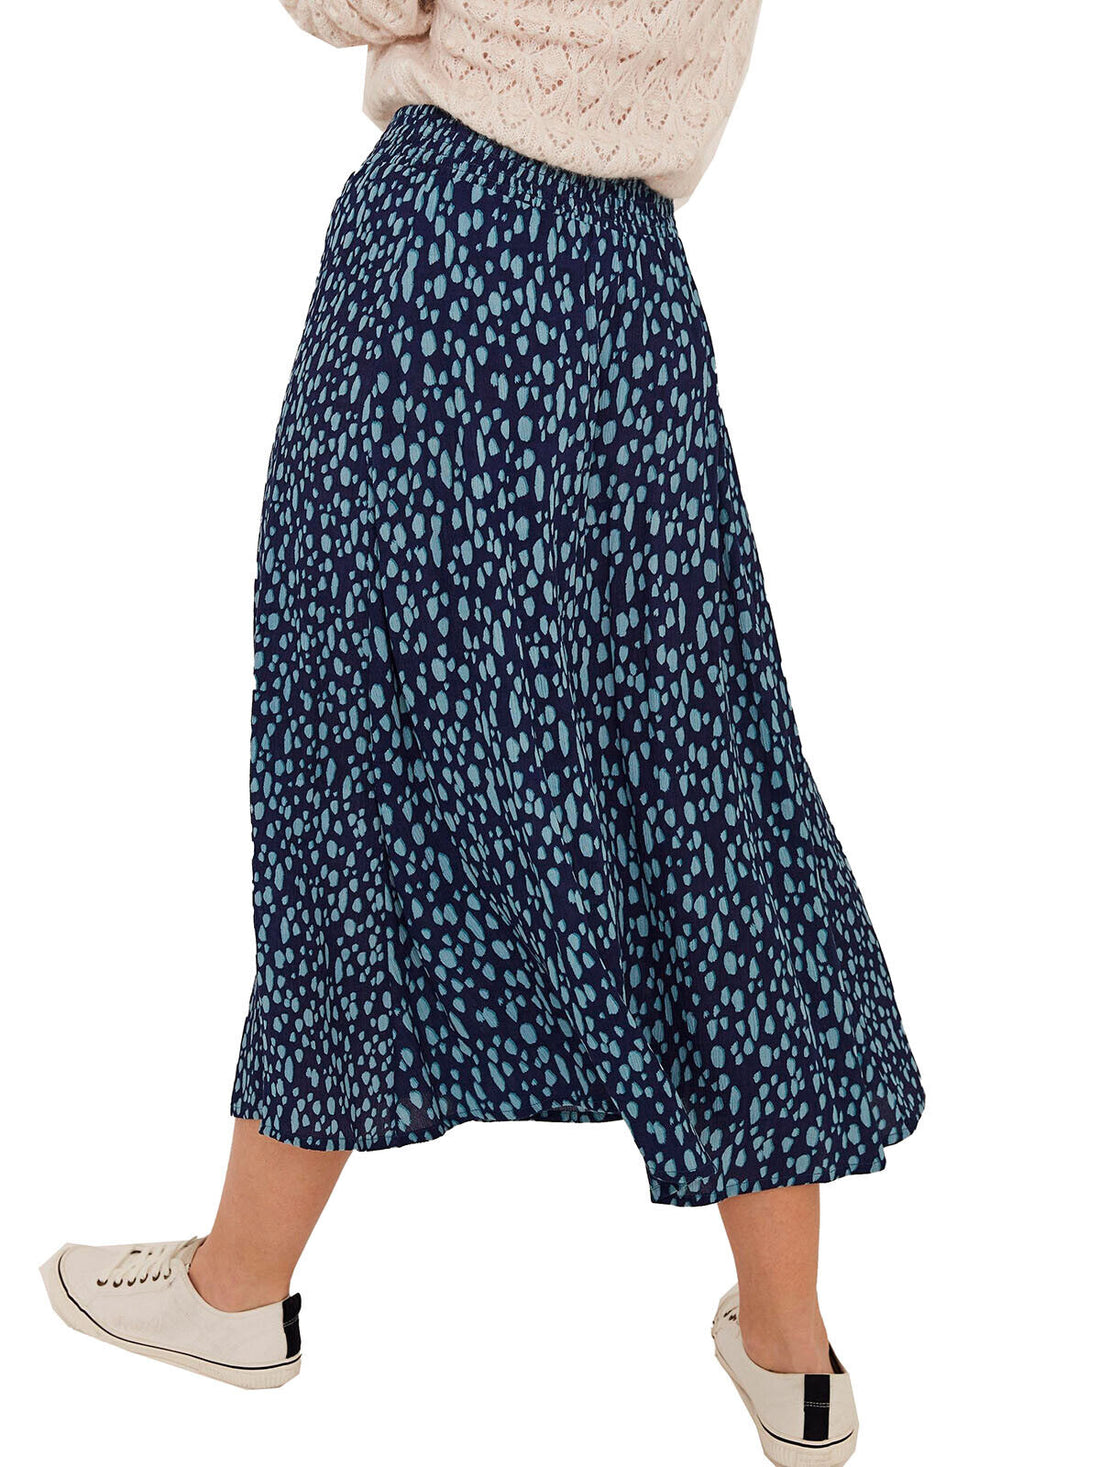 EX Fat Face Blue Printed Jersey Maxi Skirt in Size 16